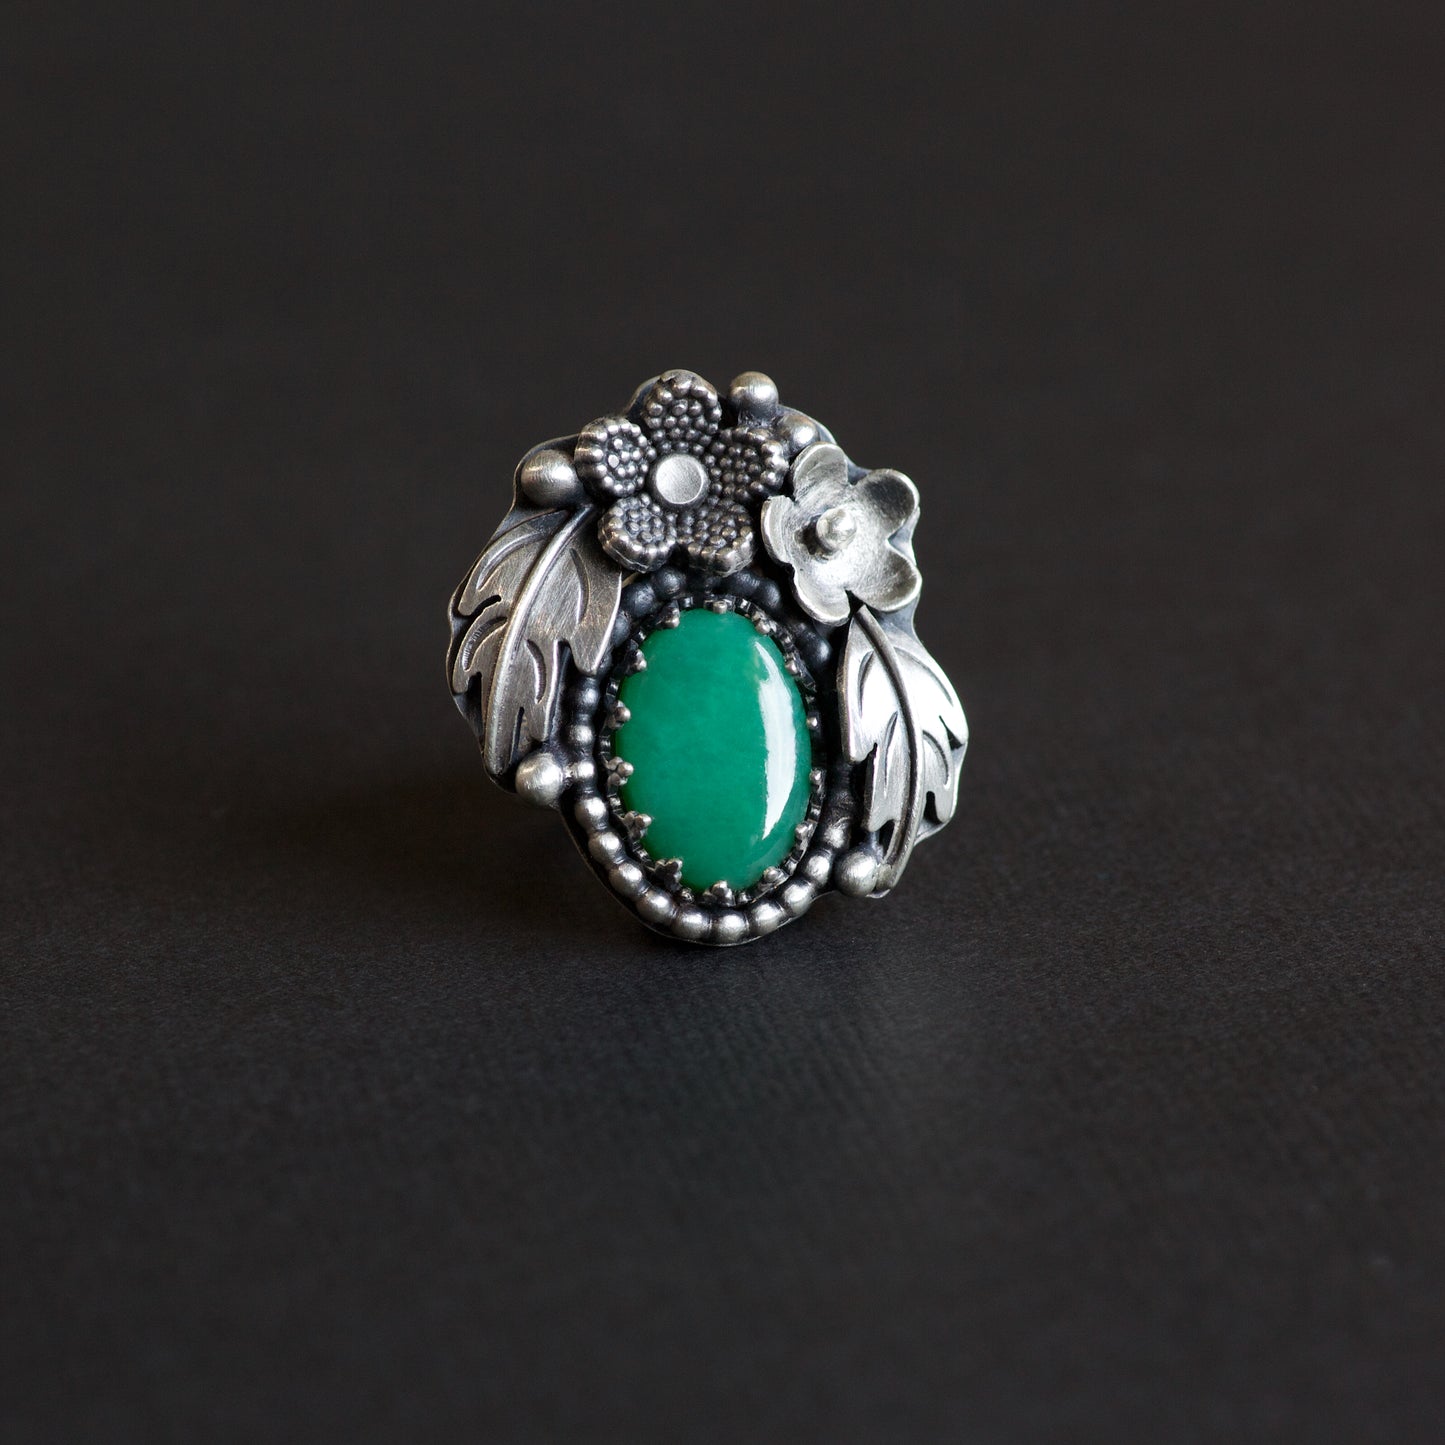 Chrysoprase Hawthorn Ring (Dolly) Size: 6 1/2 or M 1/2